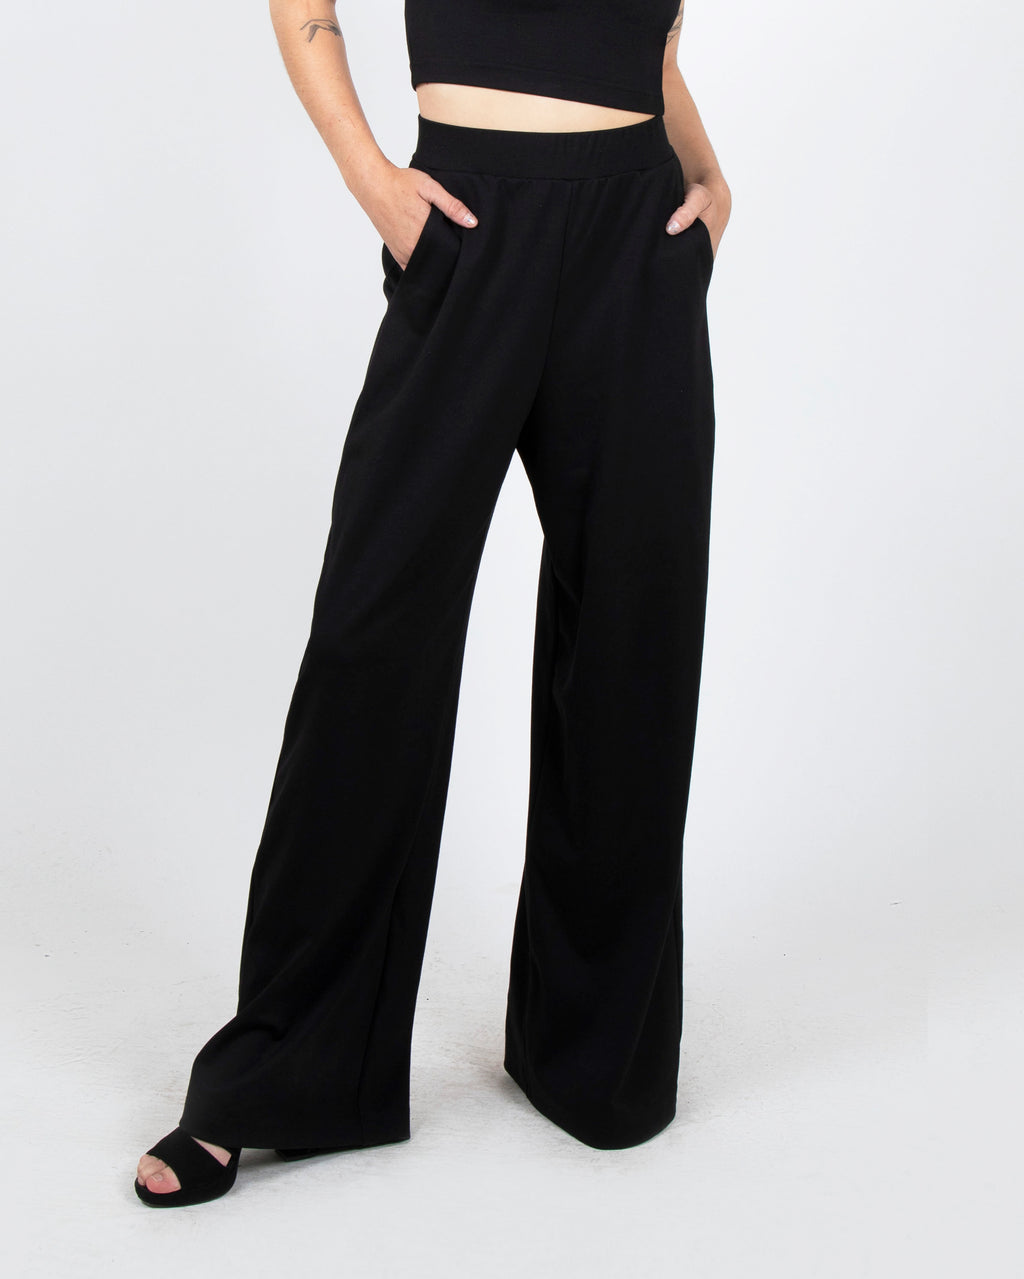 The High Rise Pull On Ponte Pant, bird by design